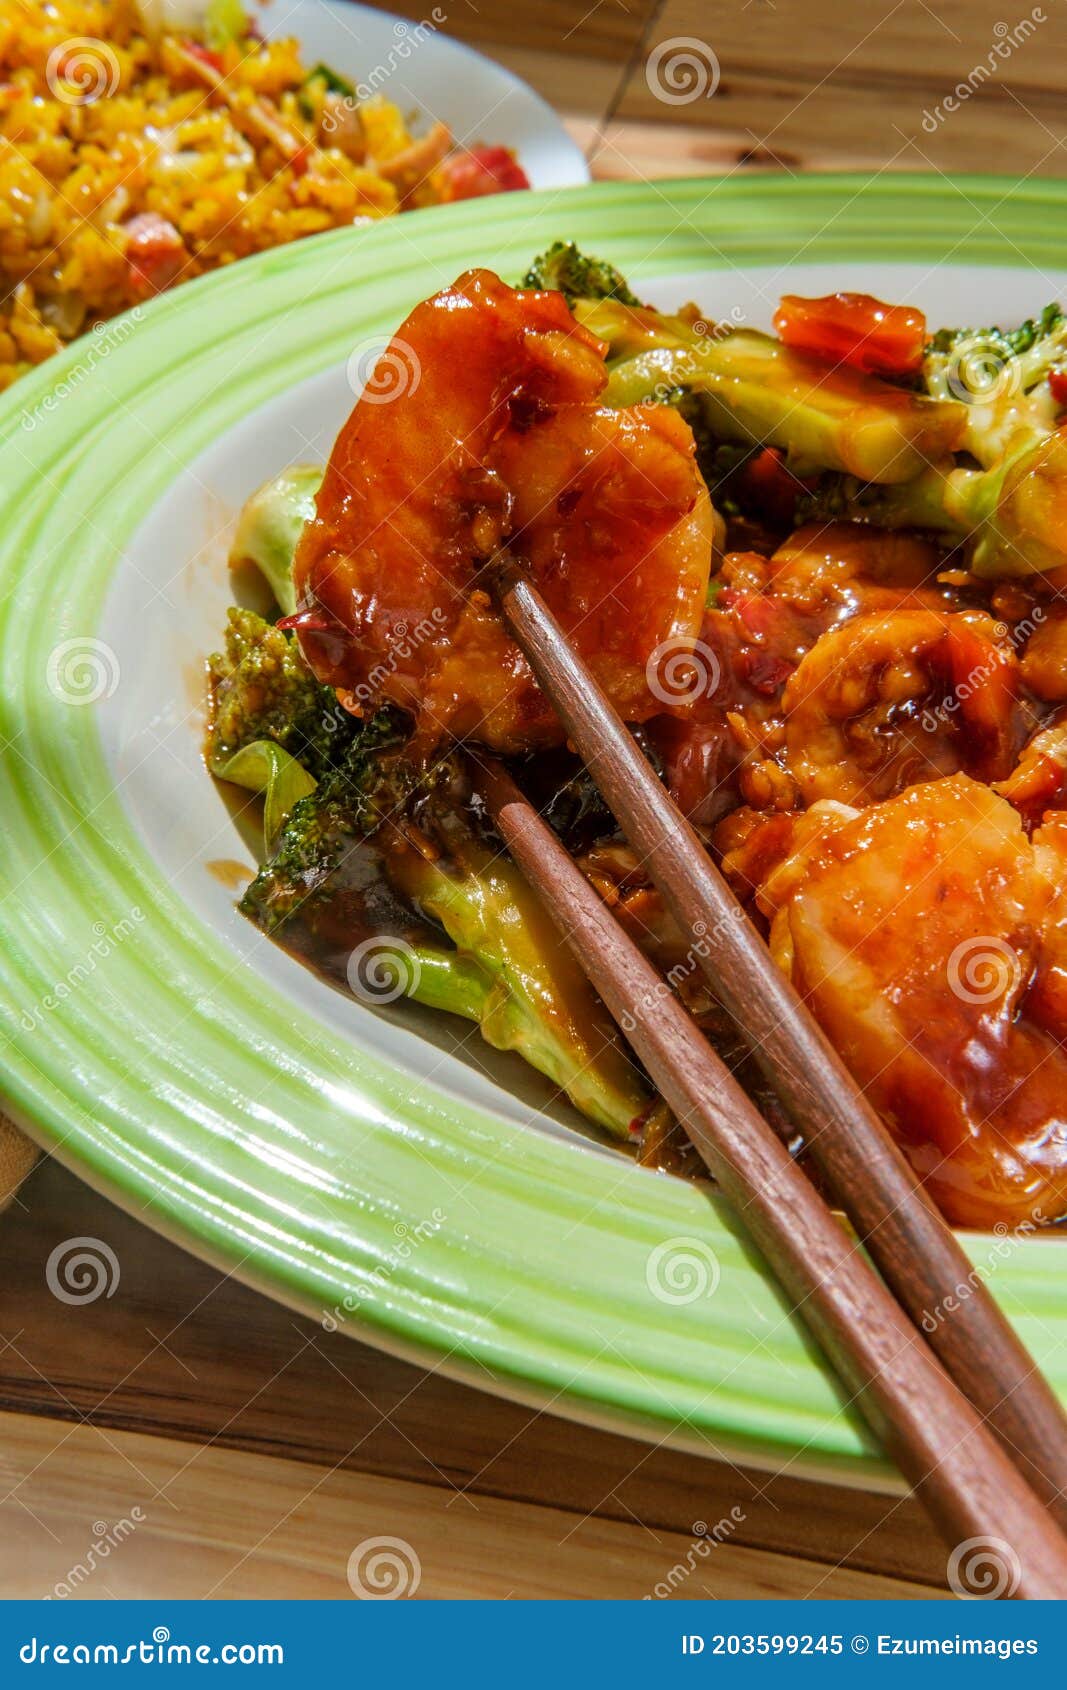 Chinese Triple Delight stock image. Image of chinese - 203599245